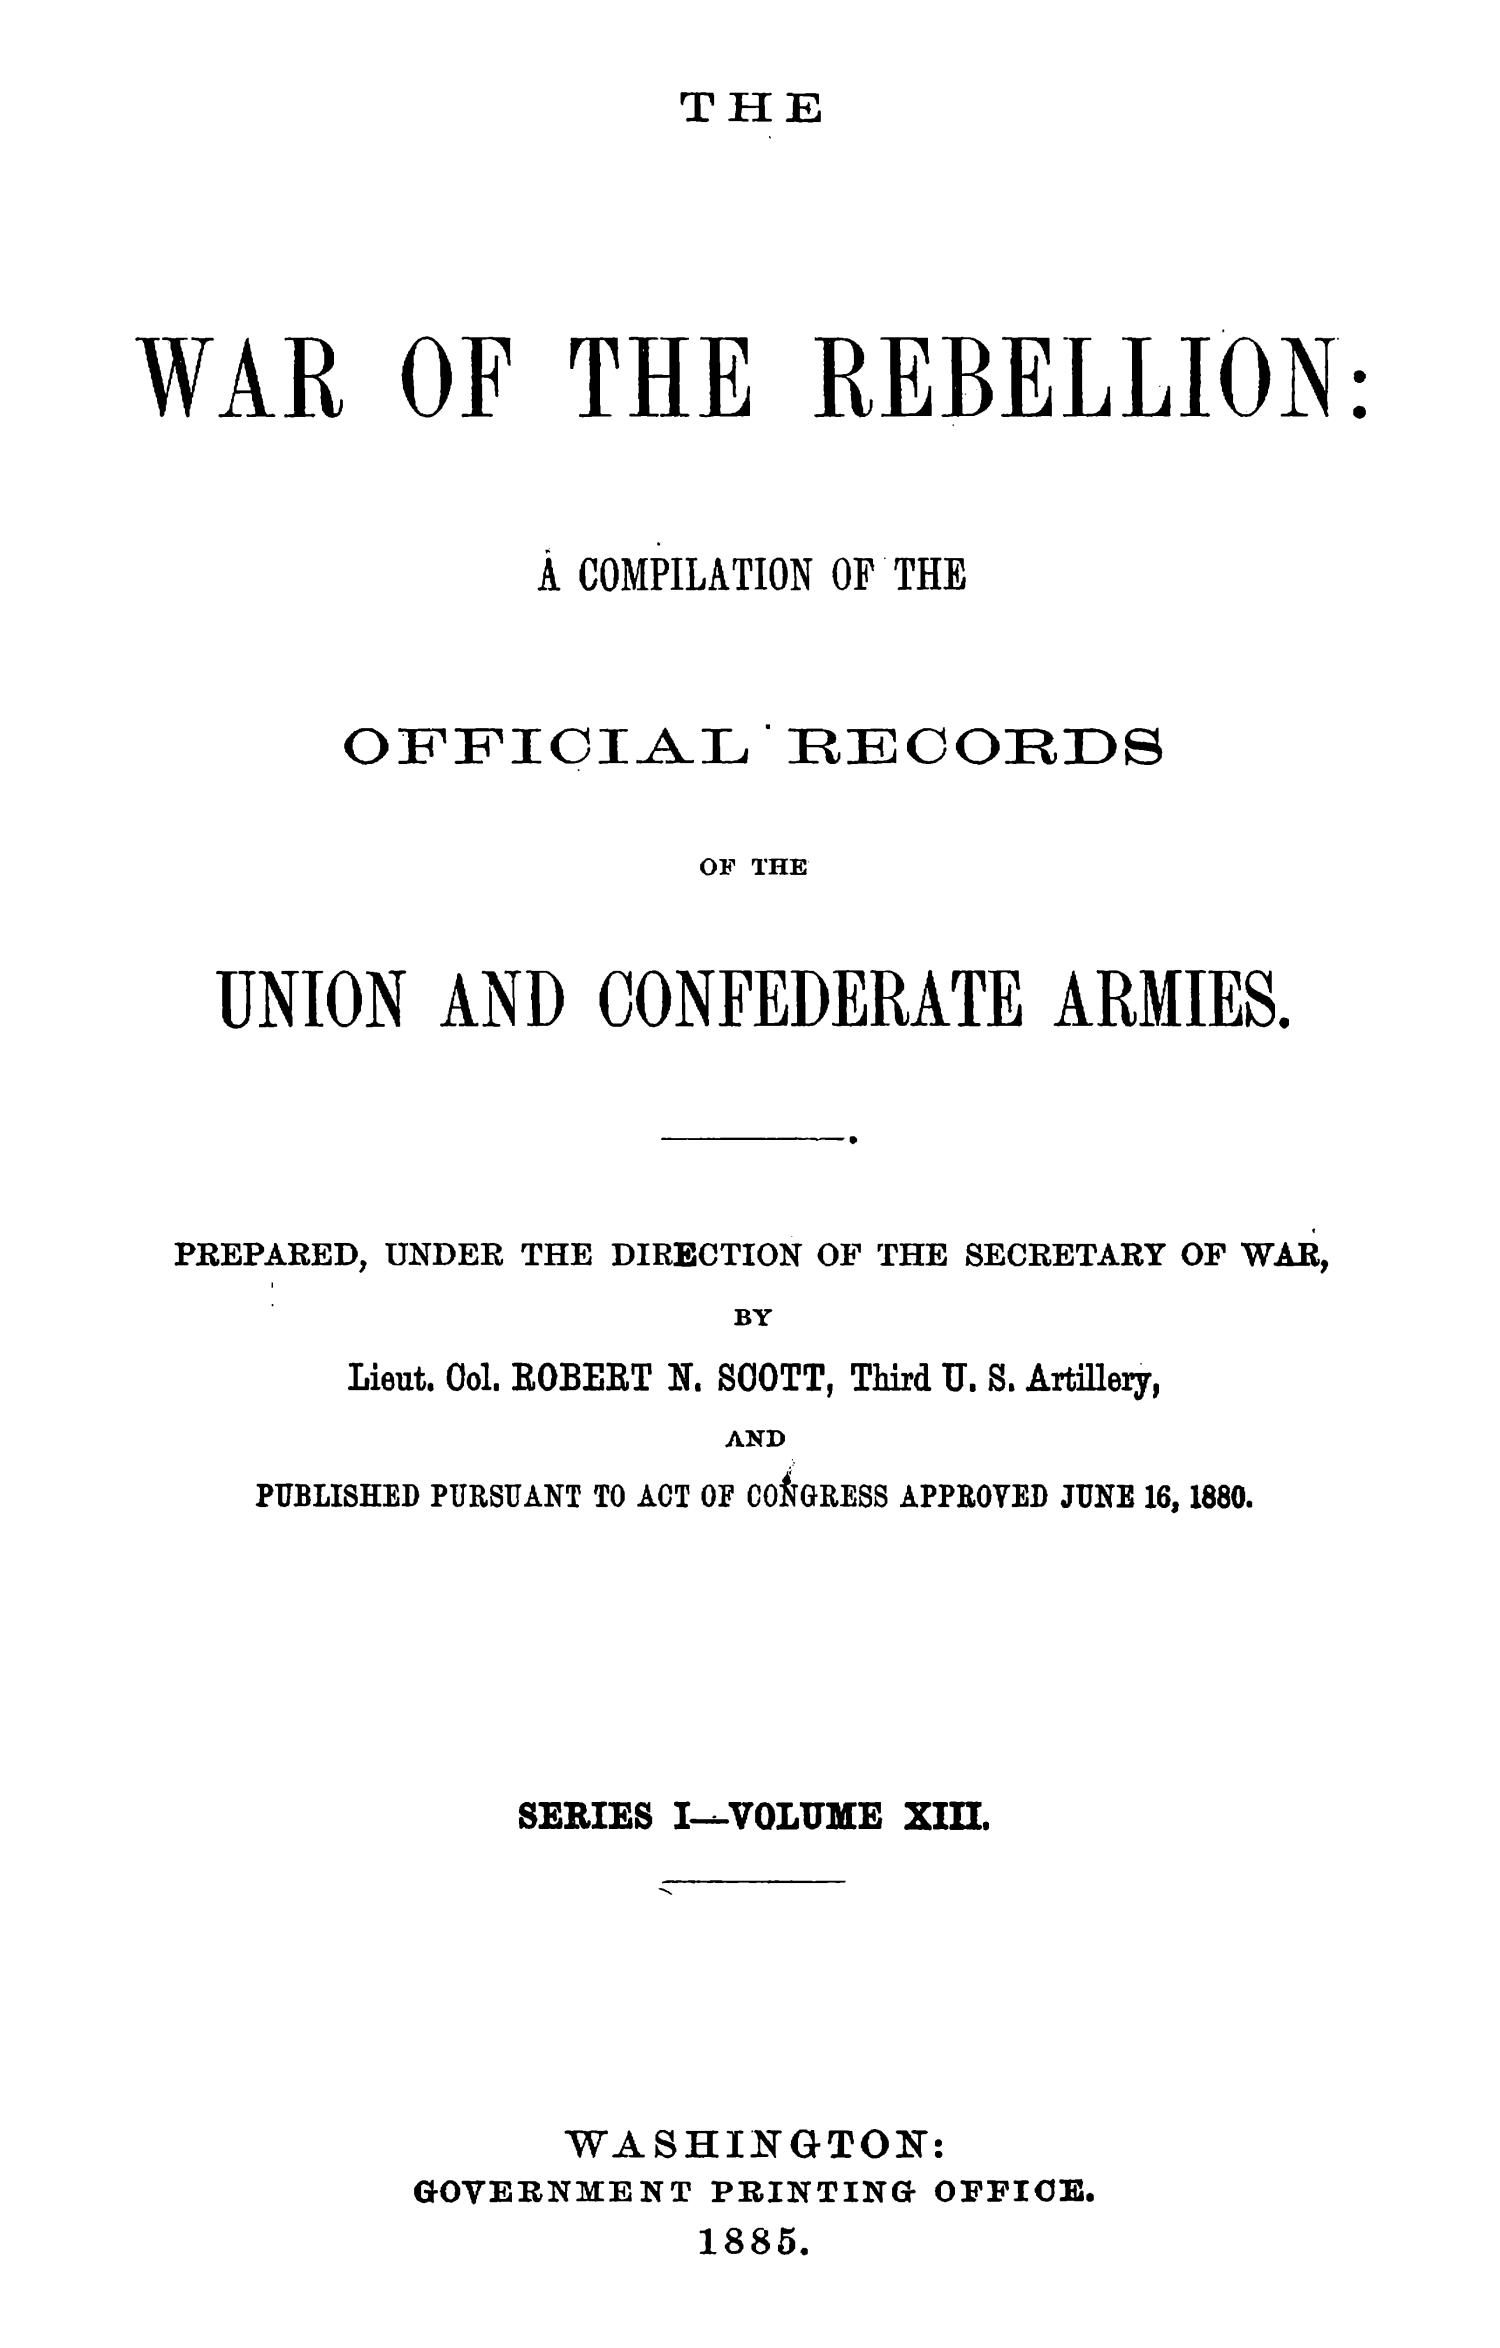 The War of the Rebellion: A Compilation of the Official Records of the Union And Confederate Armies. Series 1, Volume 13.
                                                
                                                    i
                                                